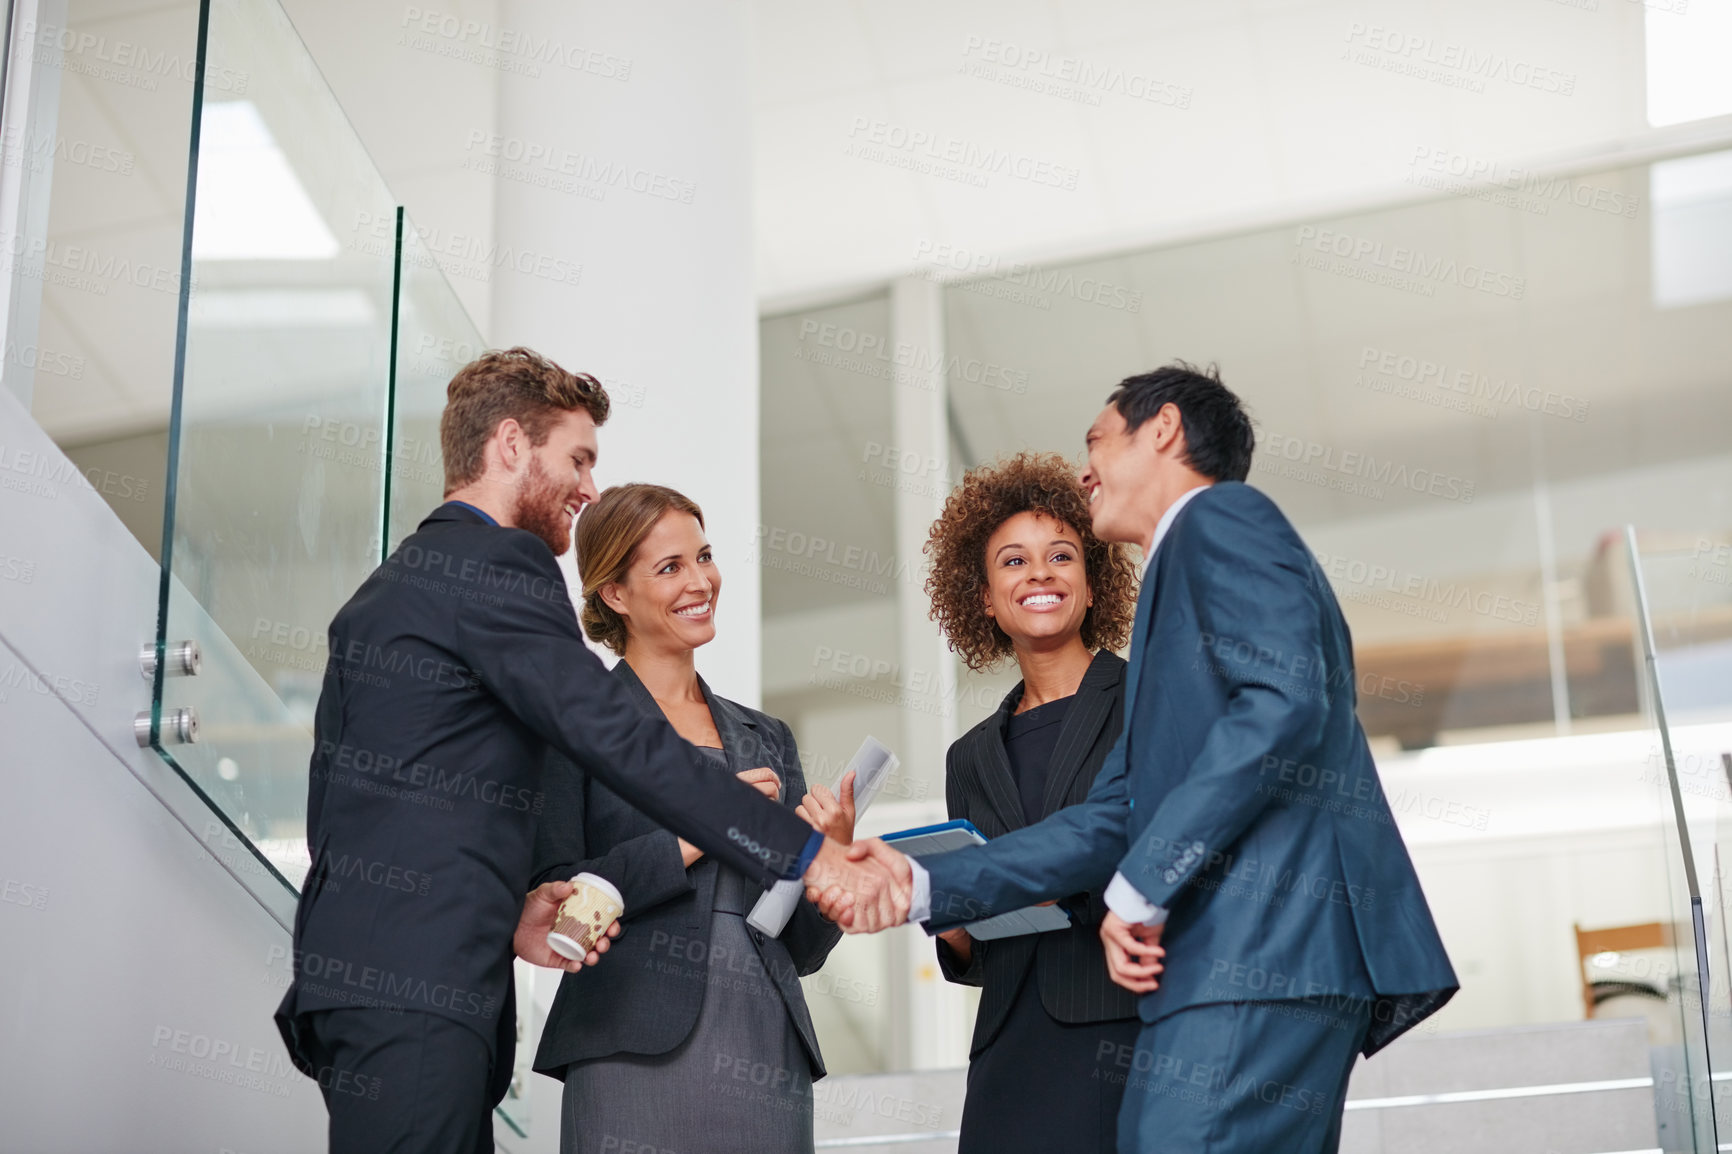 Buy stock photo Cropped shot of businesspeople shaking hands in a modern office